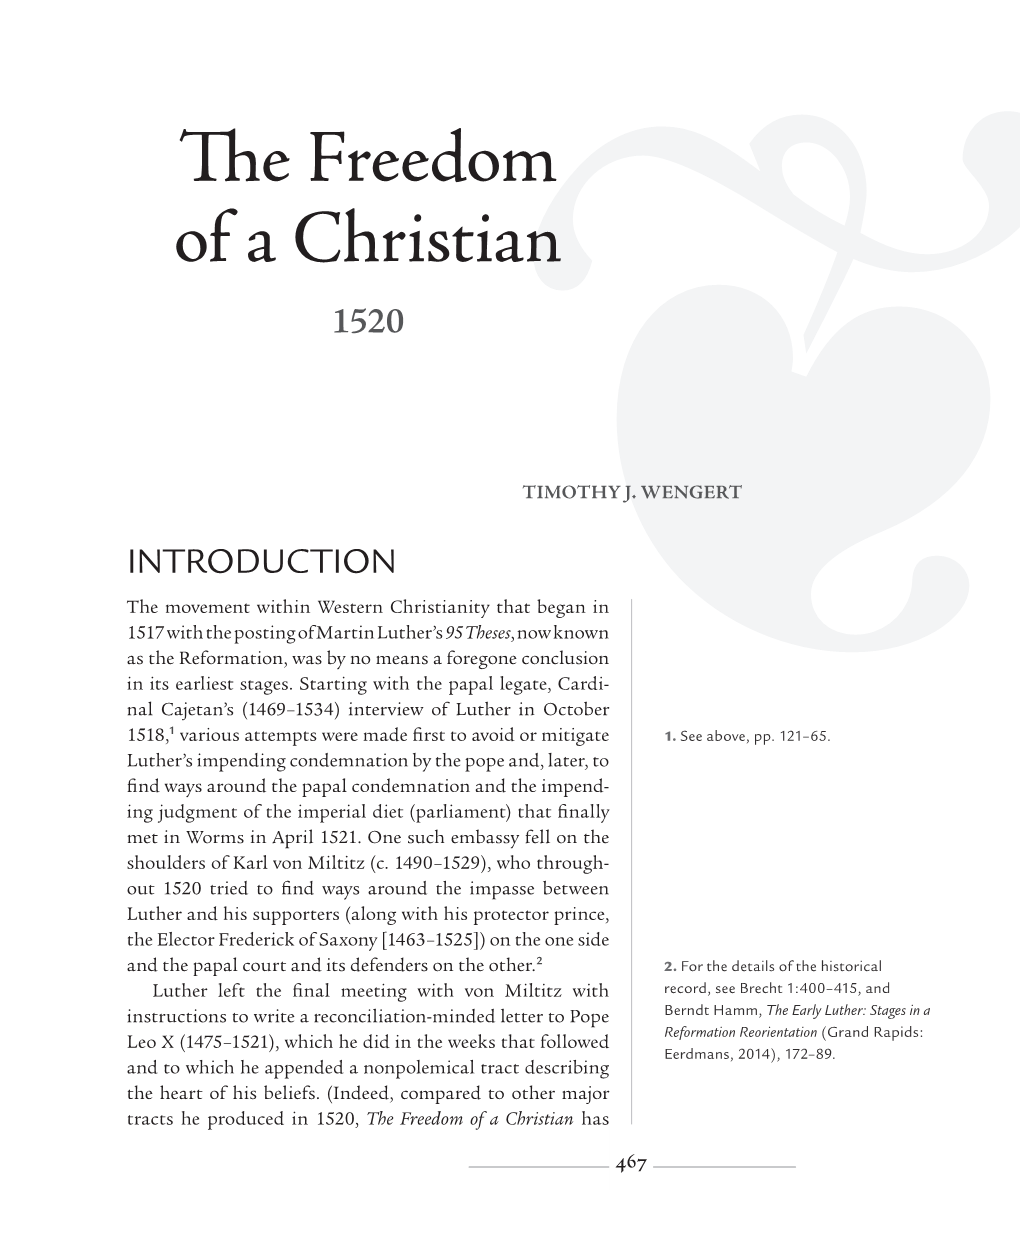 The Freedom of a Christian 1520